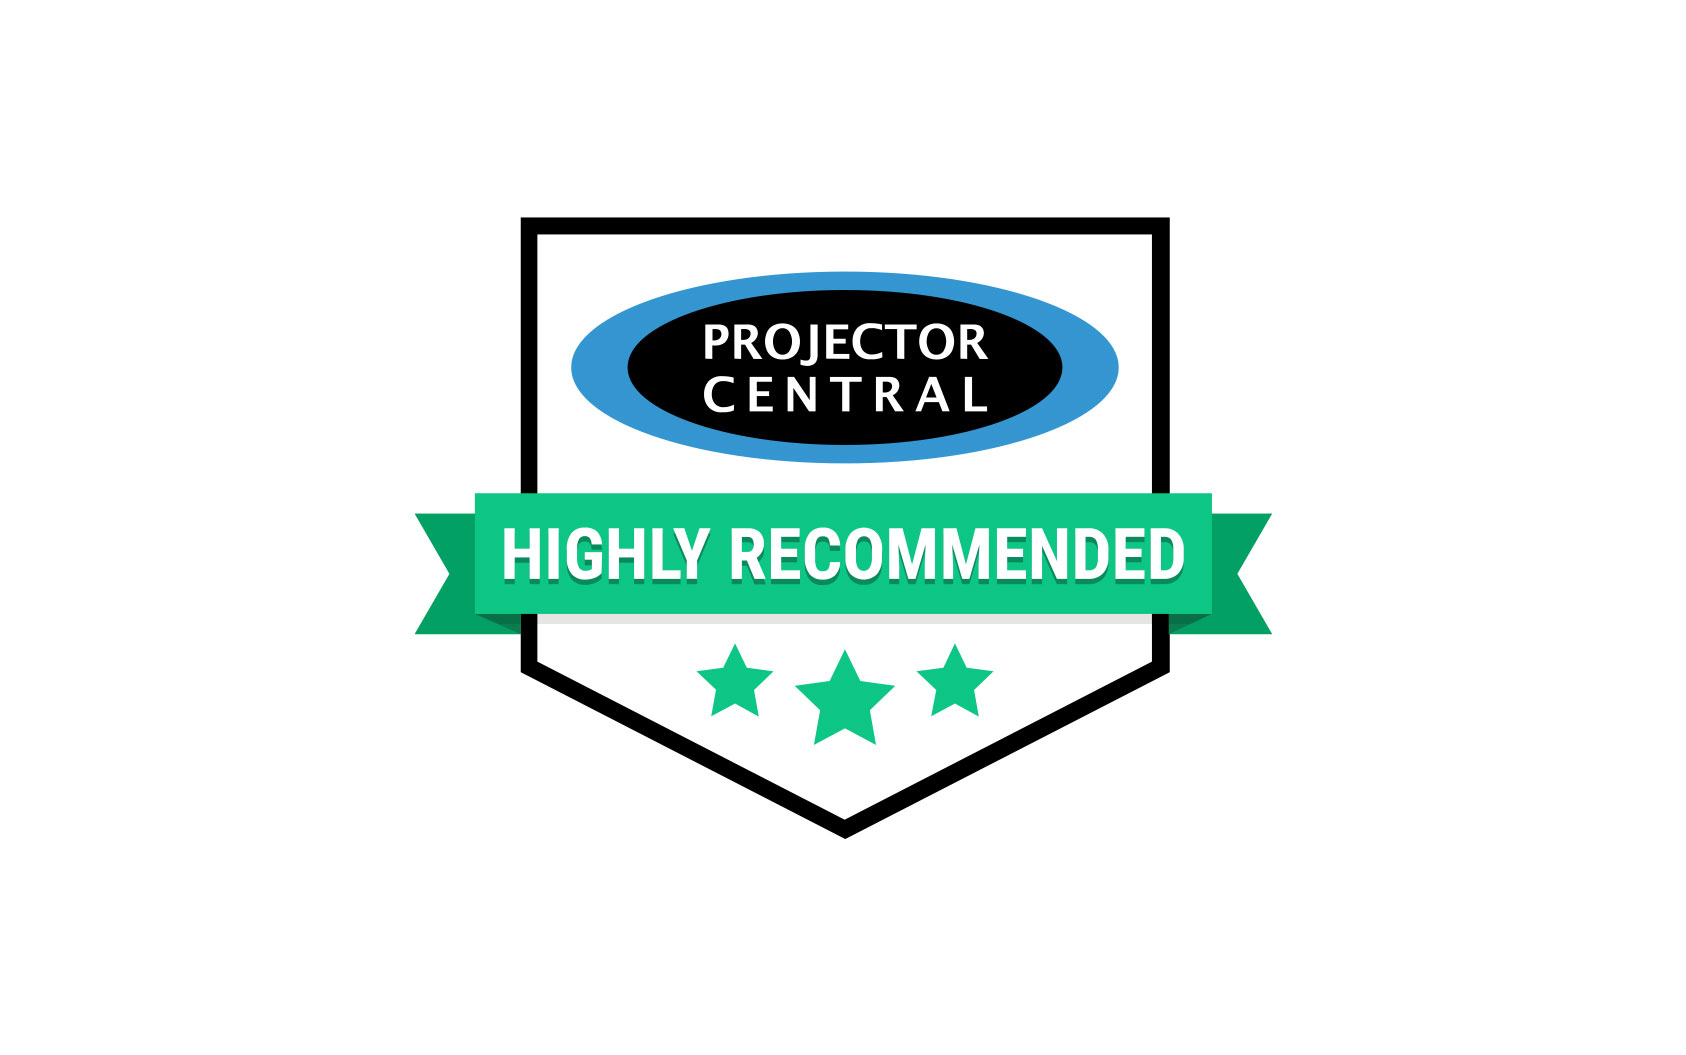 Projector Central - Highly Recommended Award